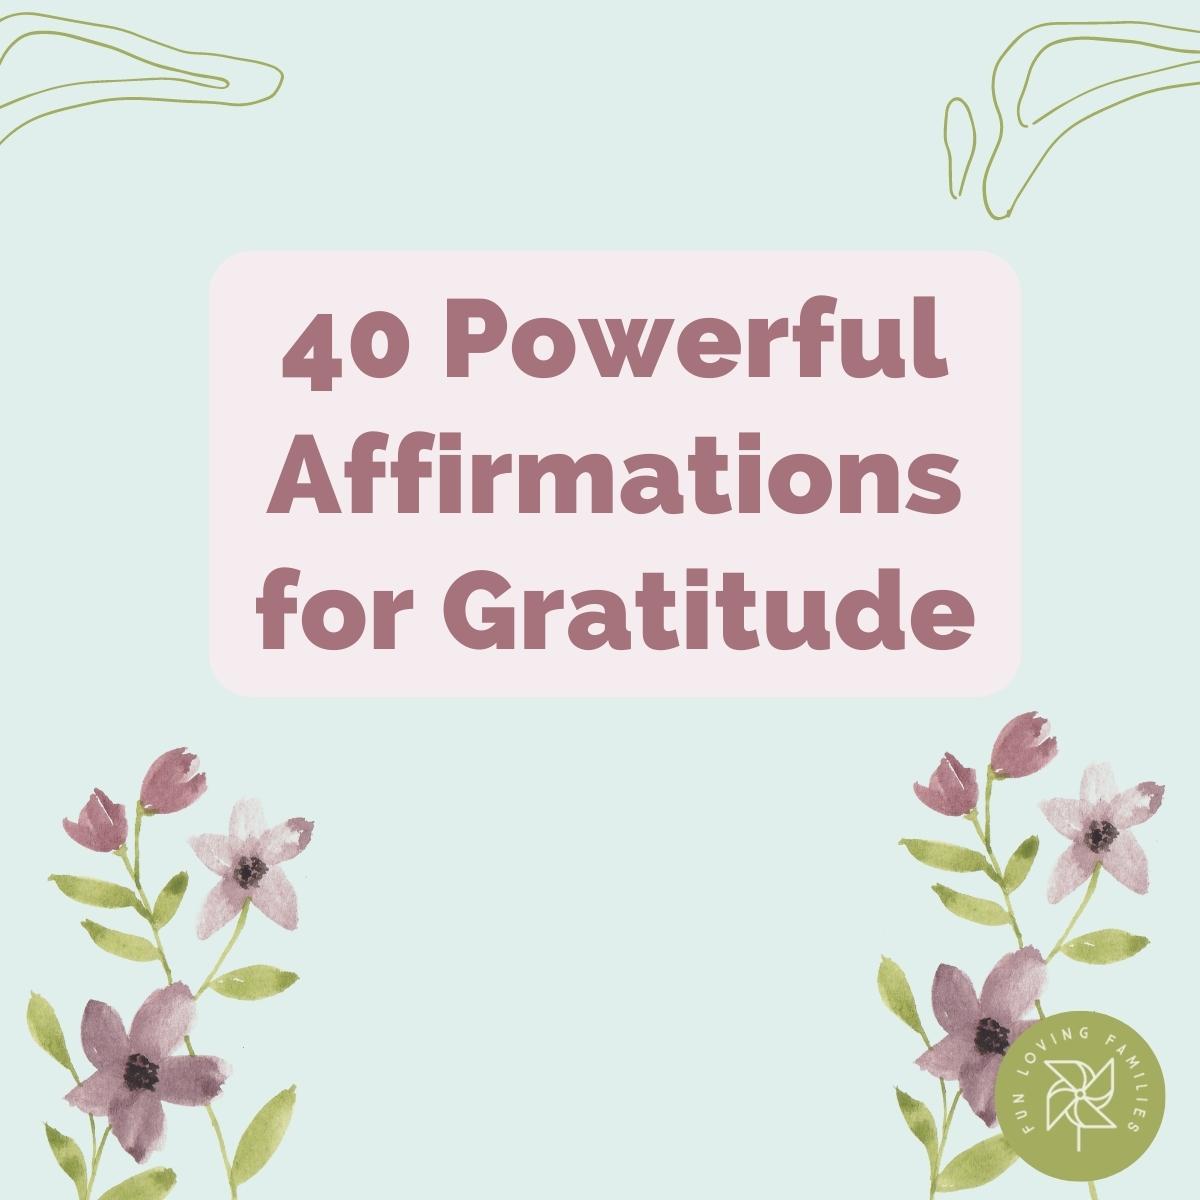 40 Powerful Affirmations for Gratitude